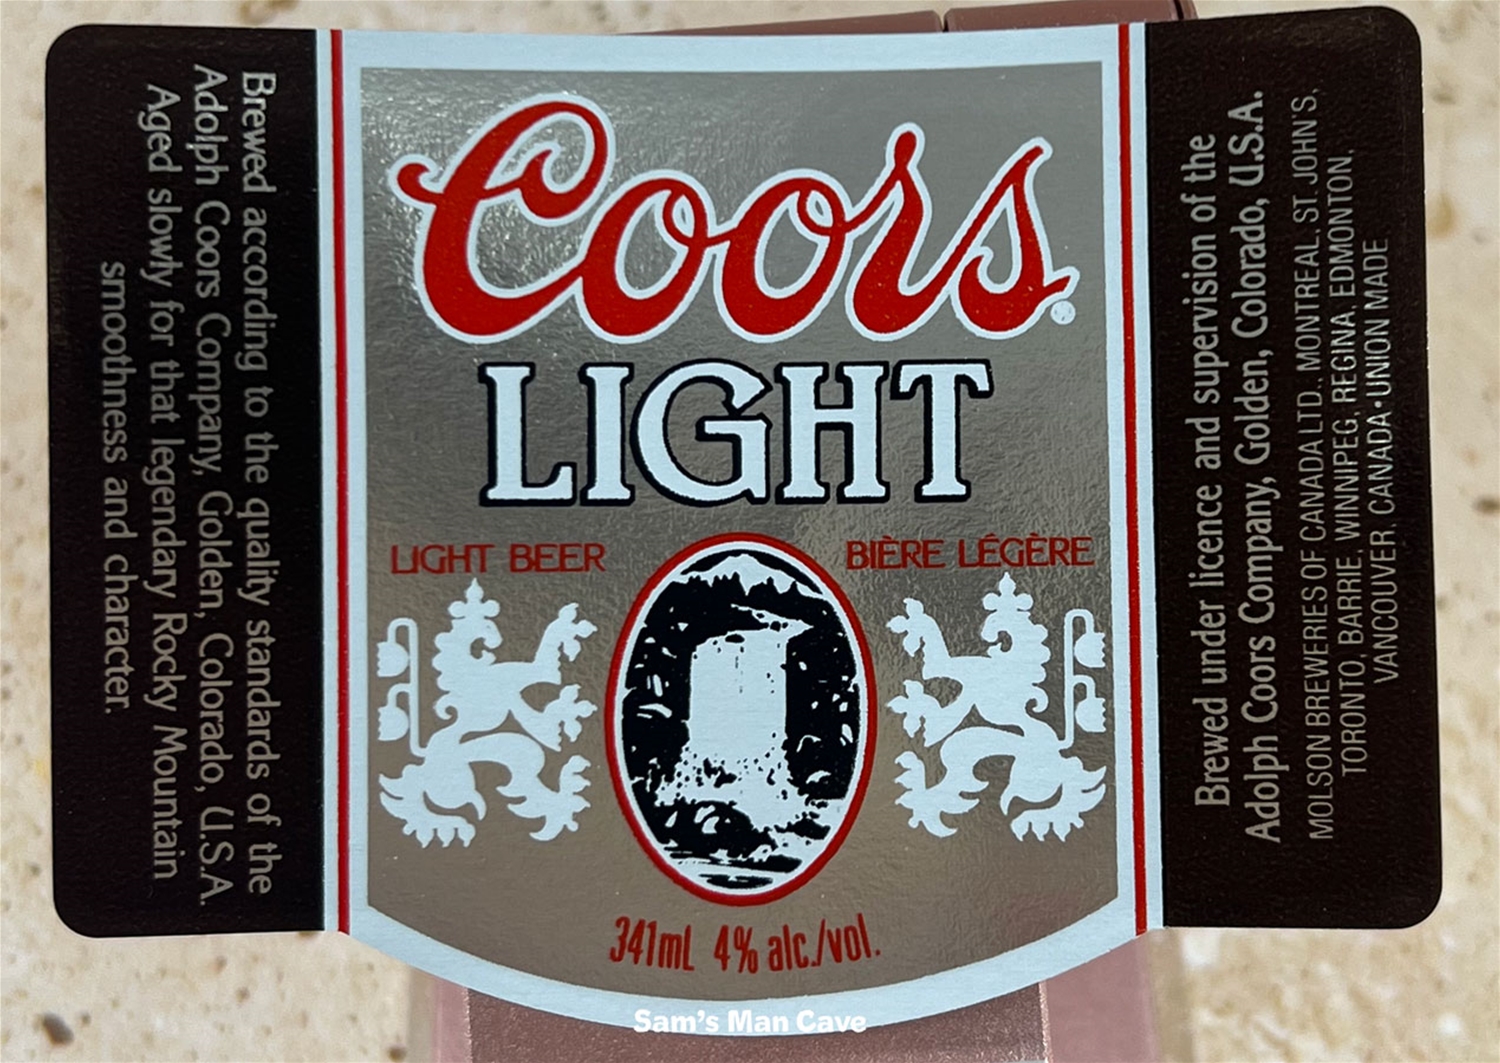 Coors Light Canadian Beer Label